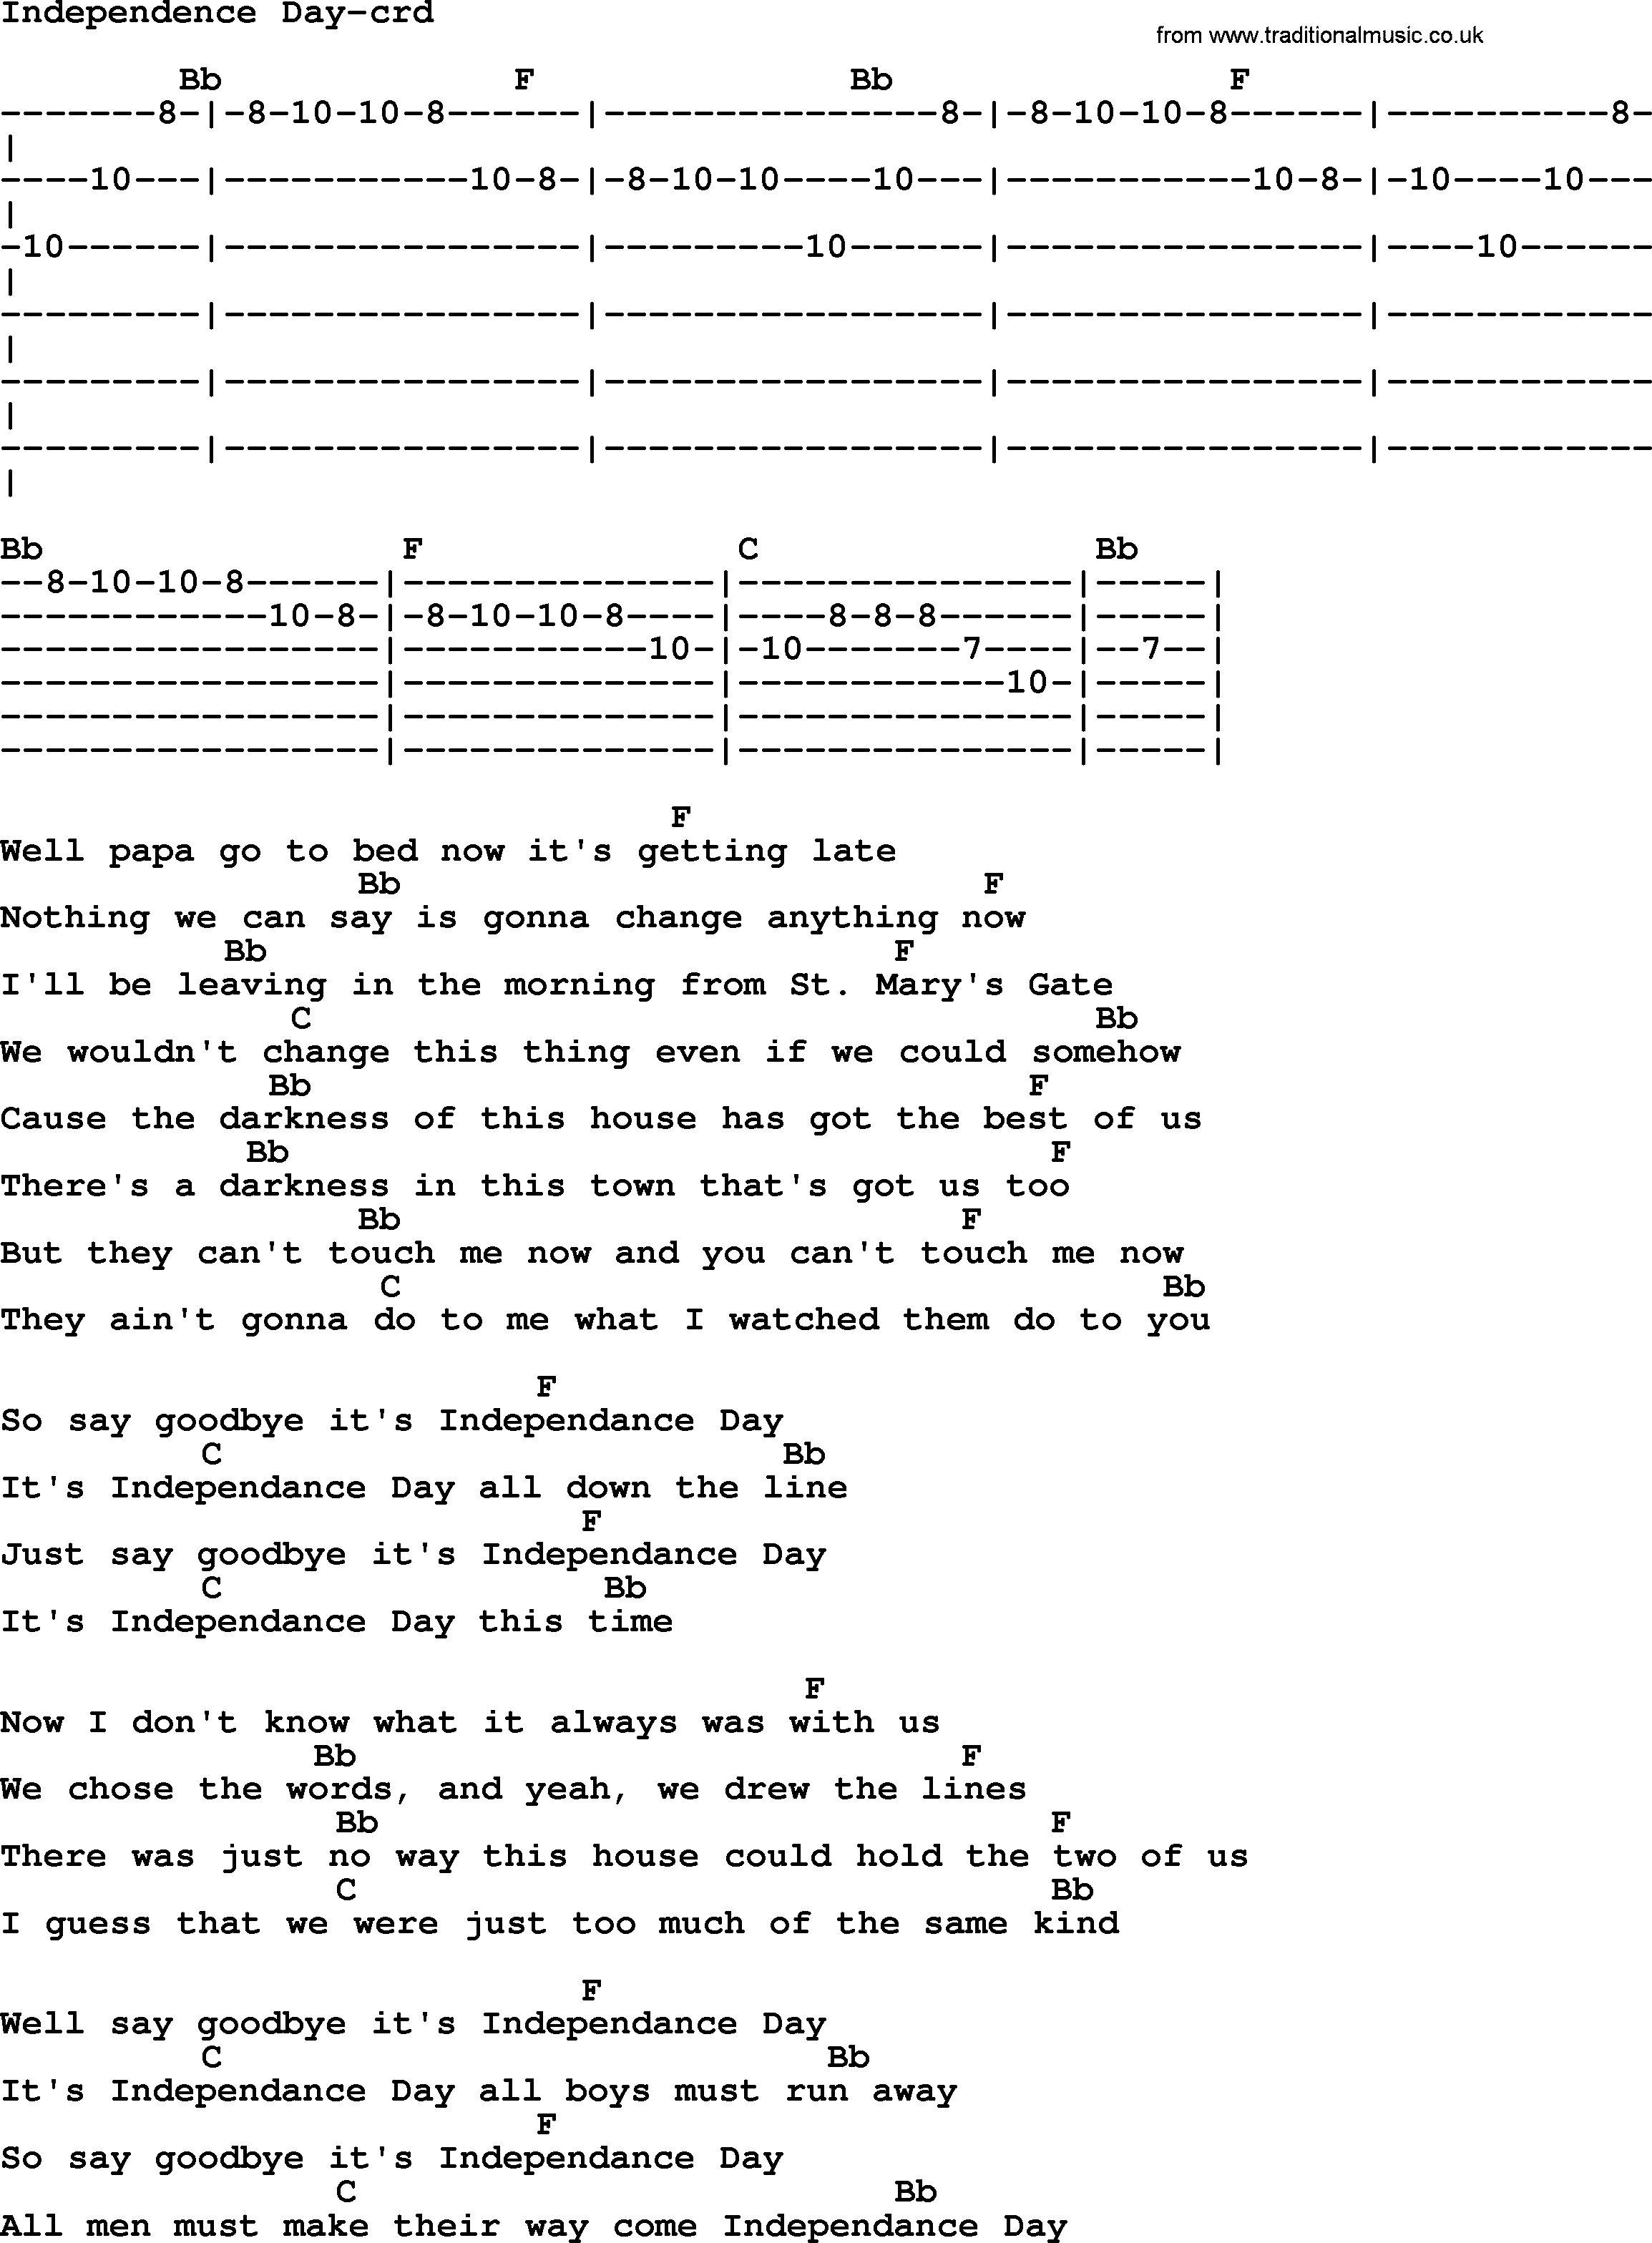 Bruce Springsteen song: Independence Day, lyrics and chords